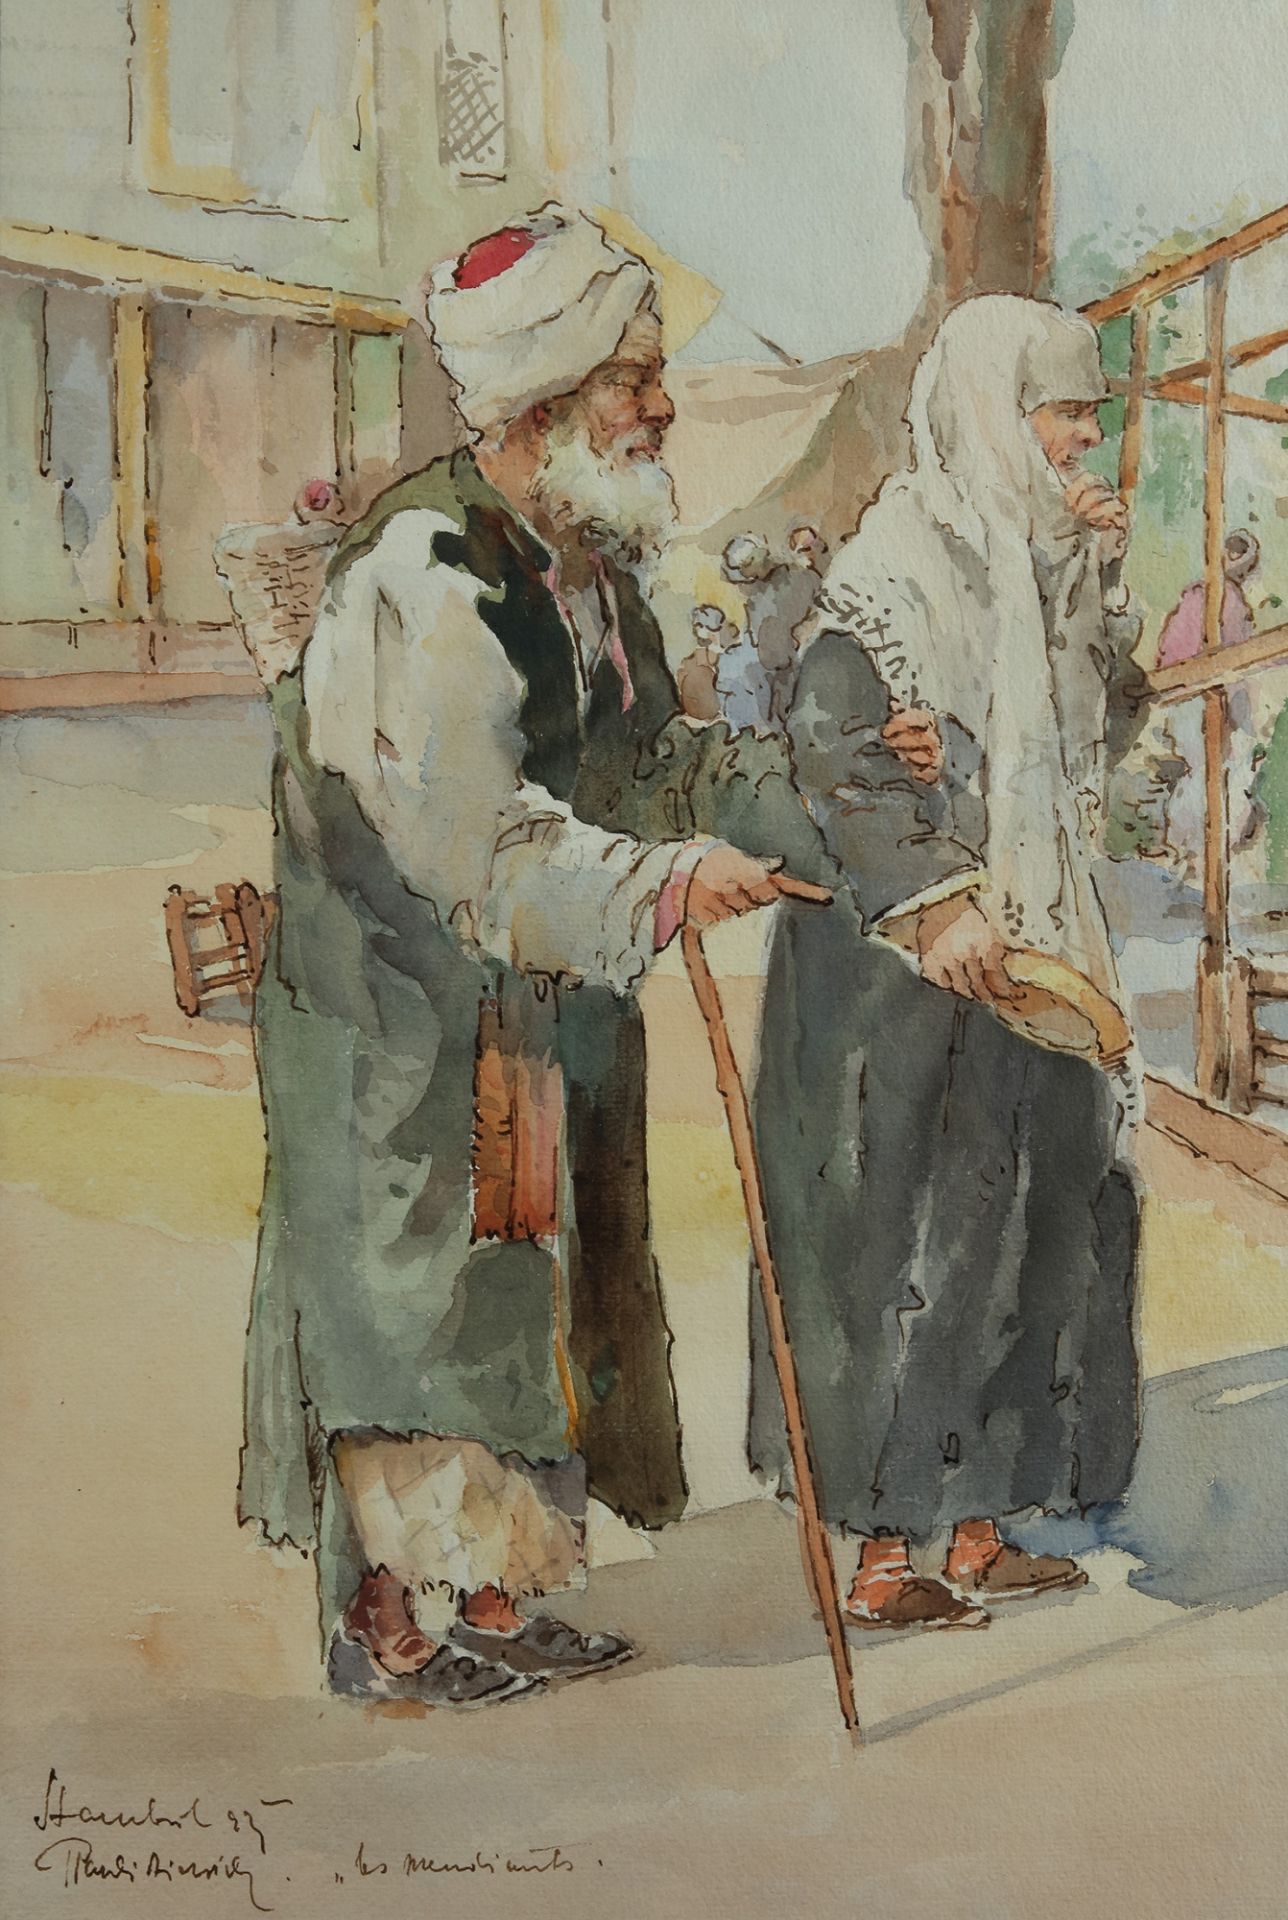 A painting depicting two beggars